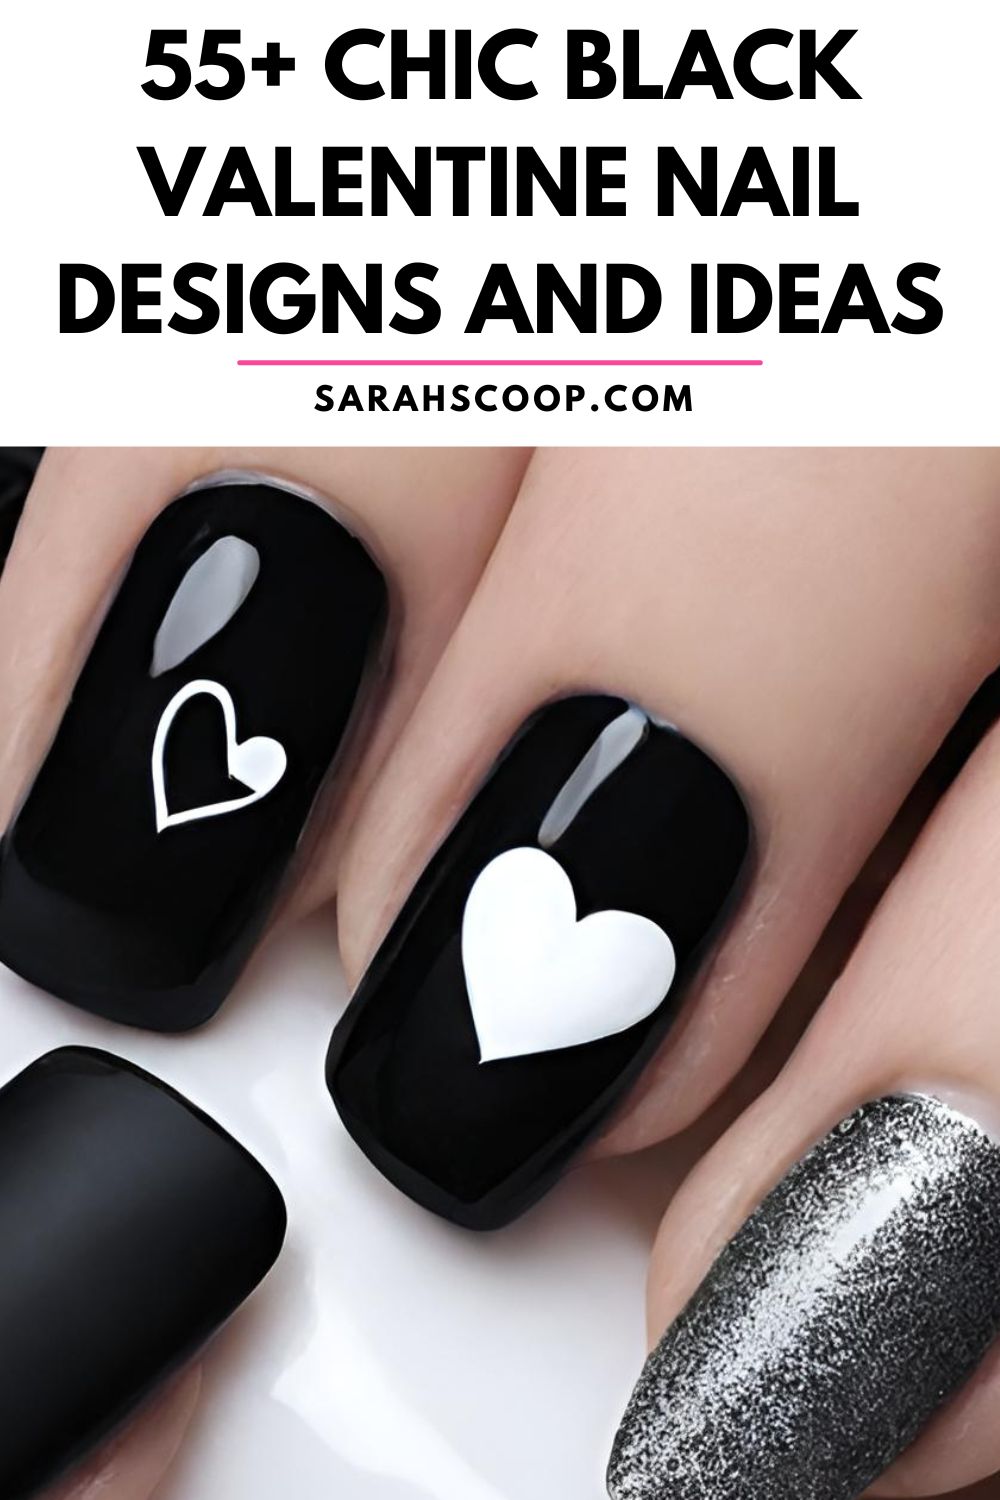 Awesome 43 Cute Black Nail Art Designs - #art #awesome #black #Cute #designs  #Nail - For Women Only | White acrylic nails, Black nail designs, Gel nails